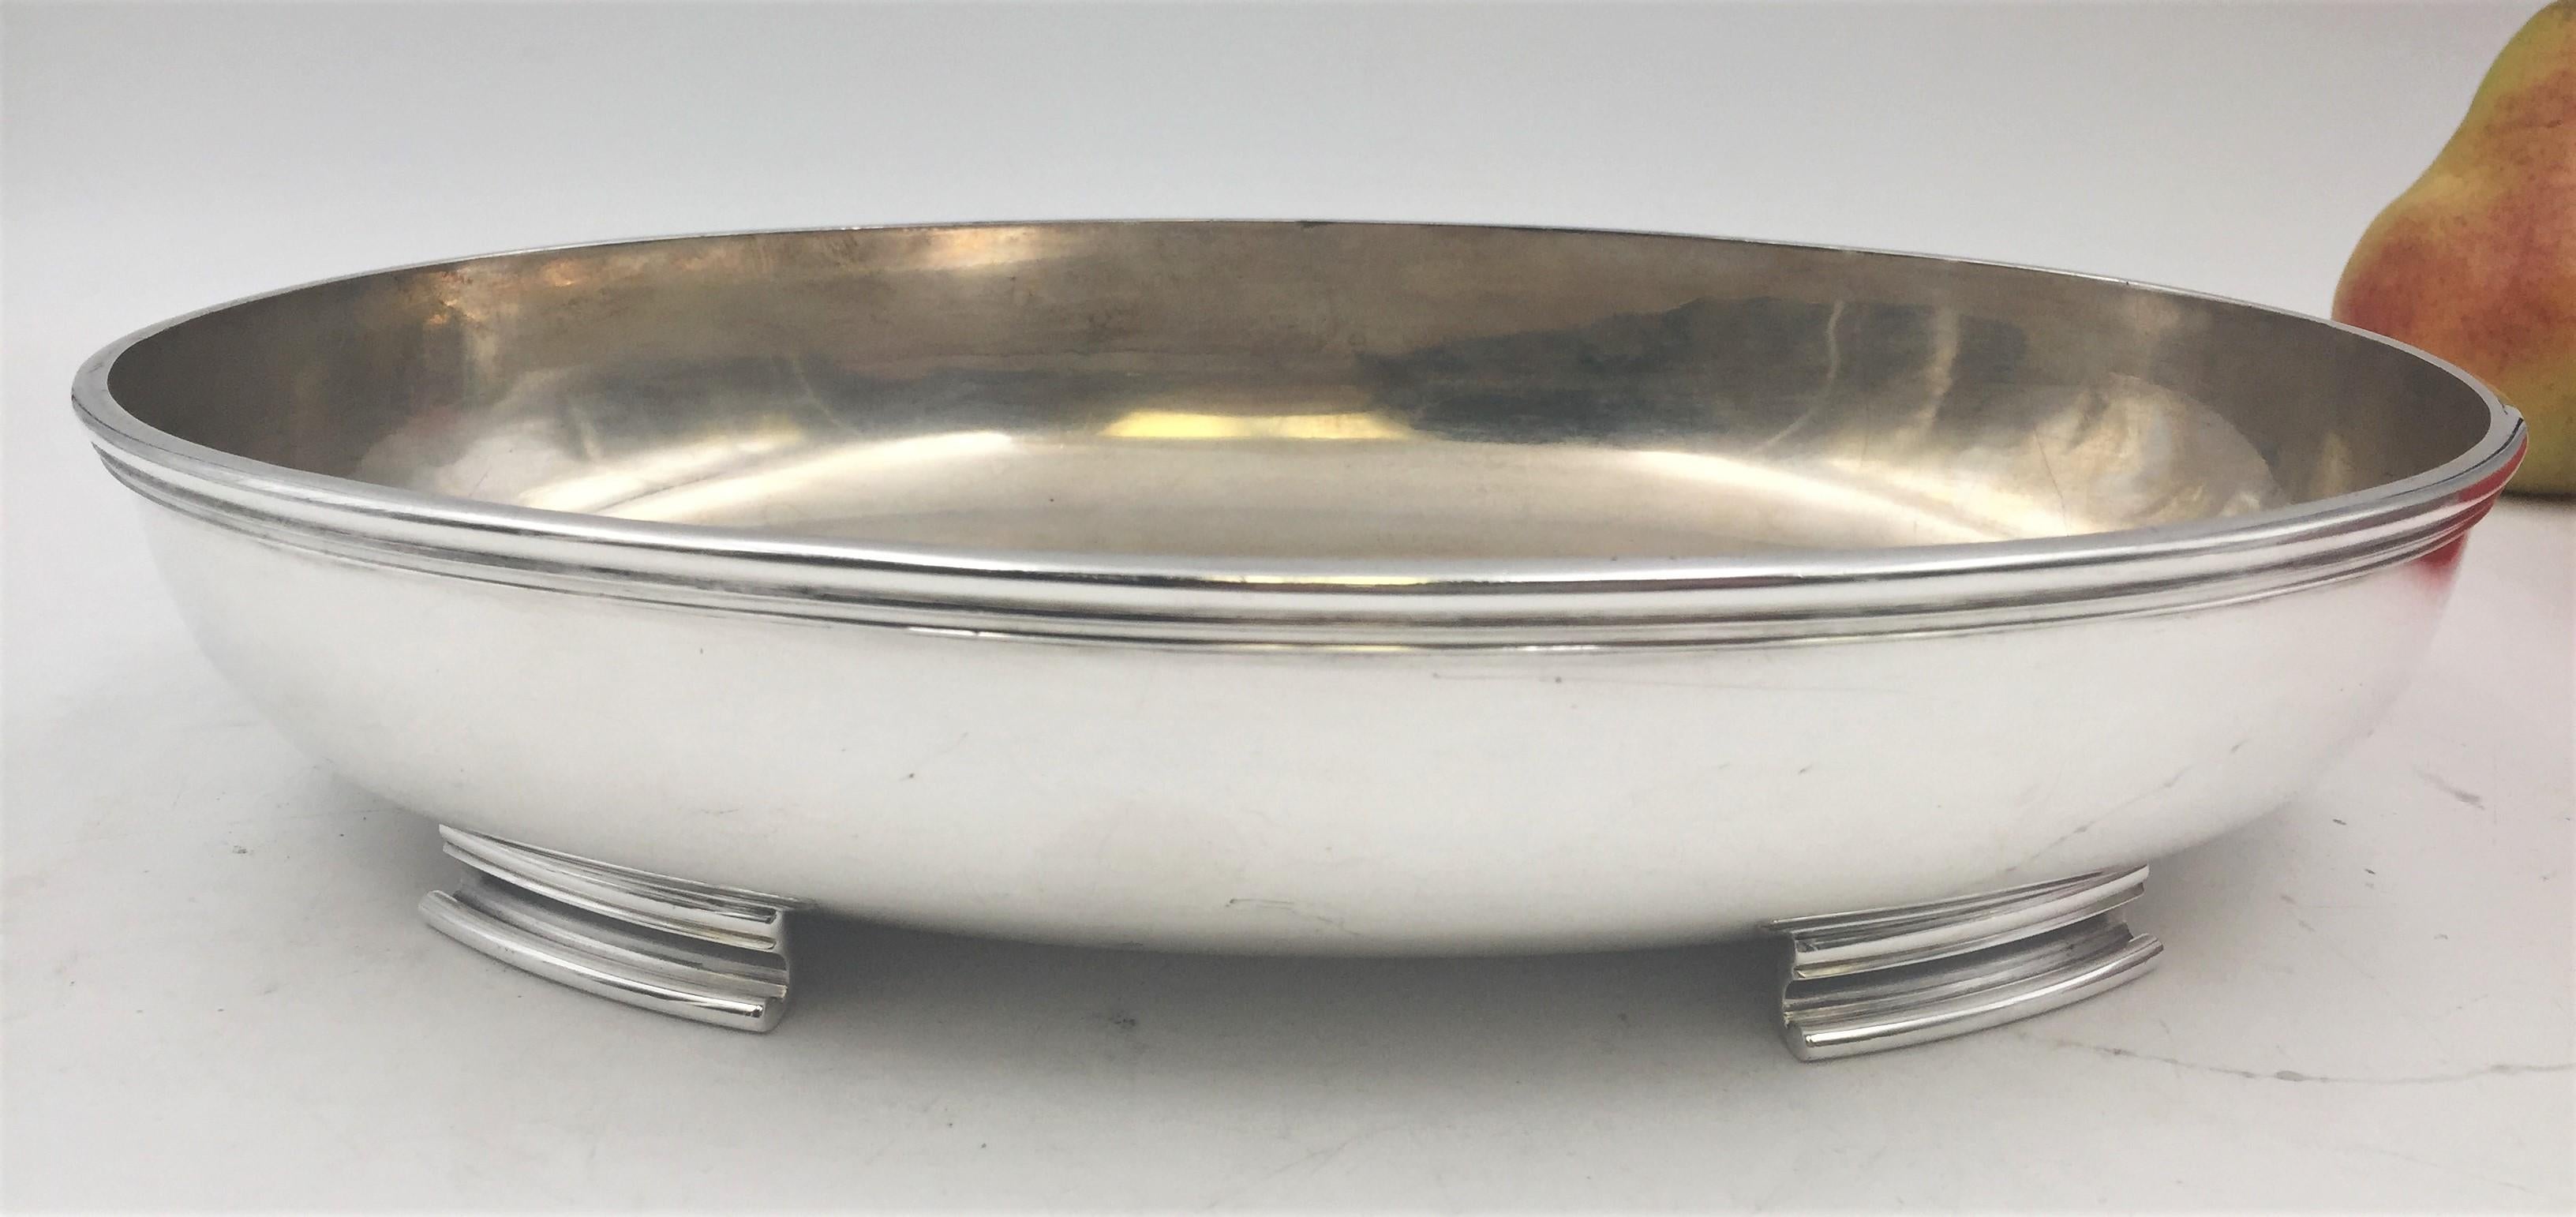 1942 Finnish silver centerpiece bowl in Mid-Century Modern style standing on 4 feet in a beautiful, curvilinear design and with faintly gilt interior. It measures 11 1/3'' in length by 7 7/8'' in width by 2 1/2'' in height, weighs 24.1 ozt, and